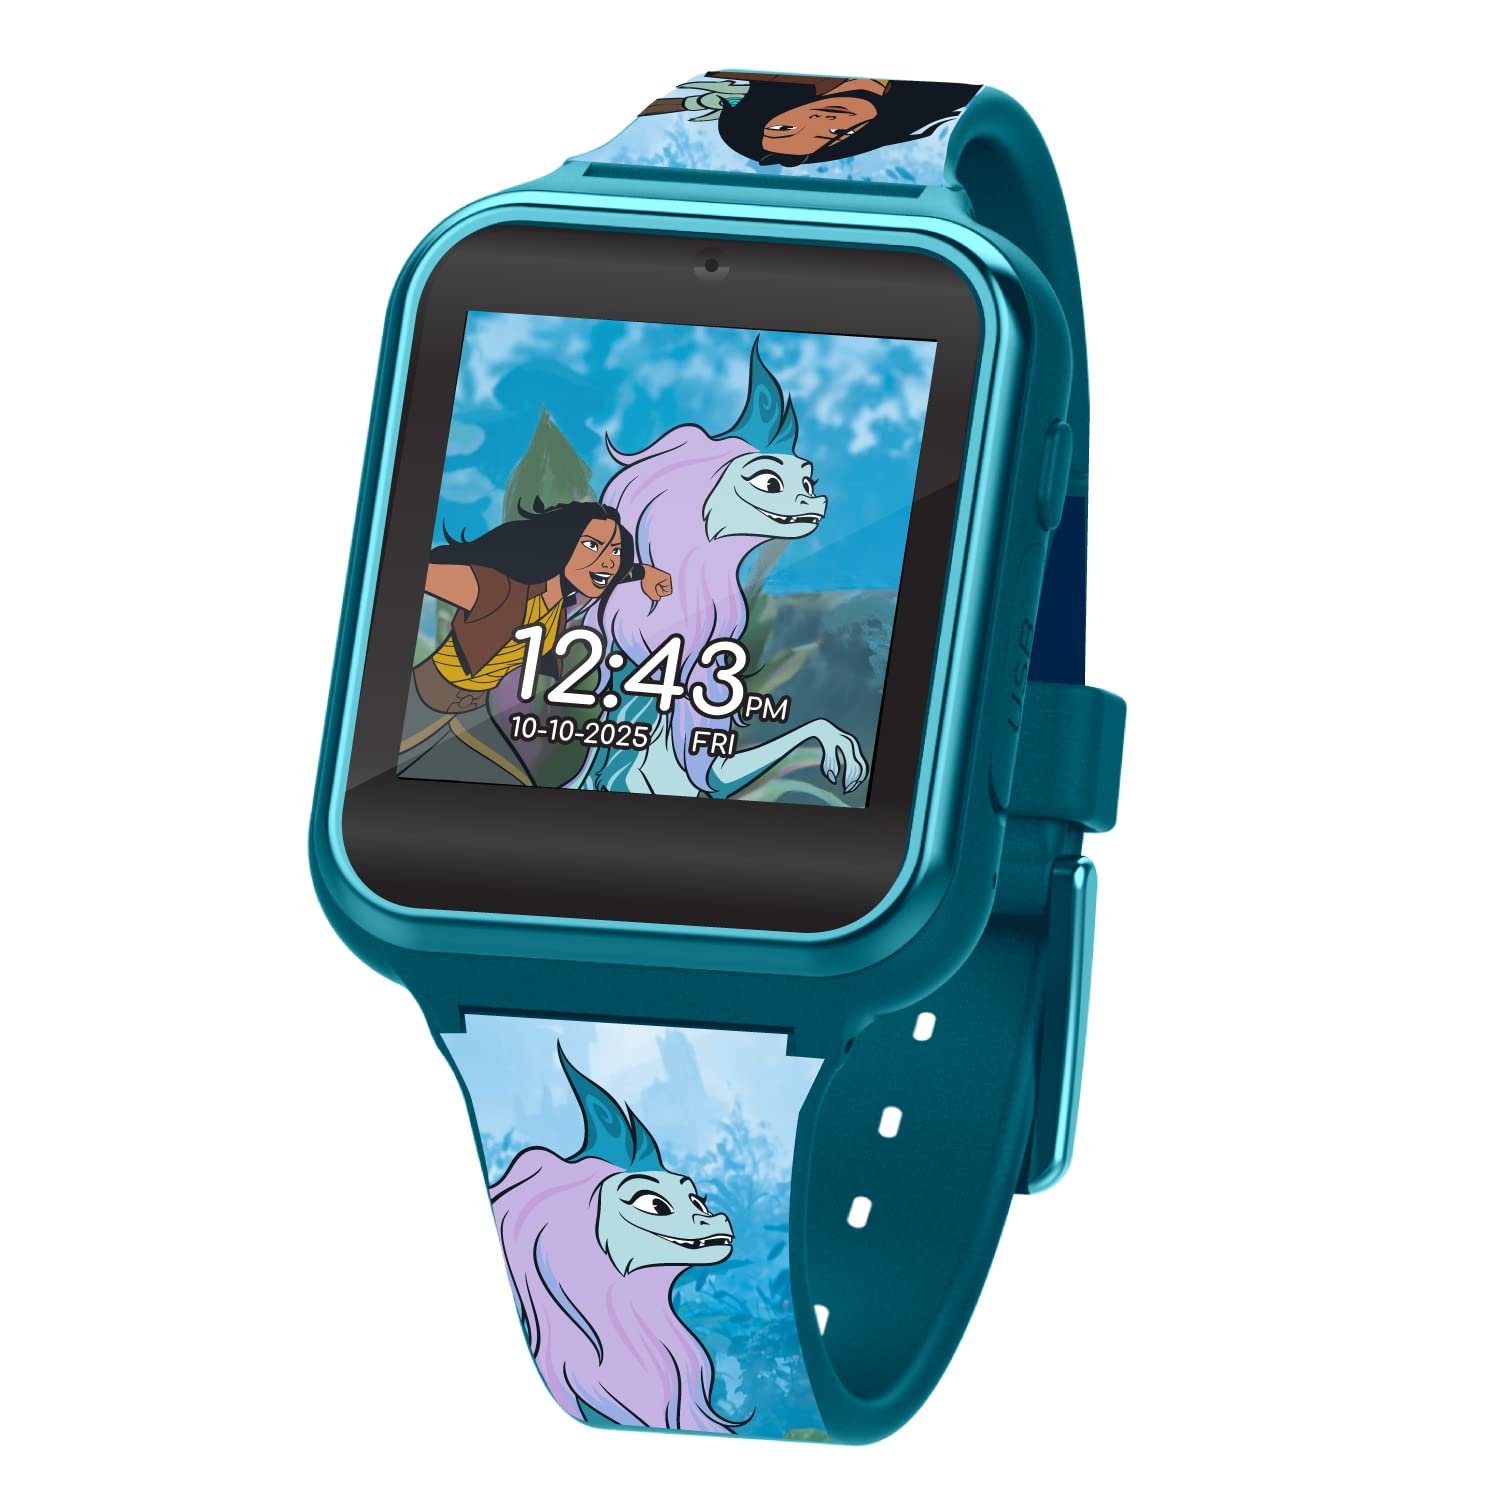 Accutime Kids Disney Raya & the Last Dragon Educational Learning Touchscreen Smart Watch Toy for Boys, Girls, Toddlers - Selfie Cam, Learning Games, Alarm, Calculator and more (Model: RLD4017AZ)